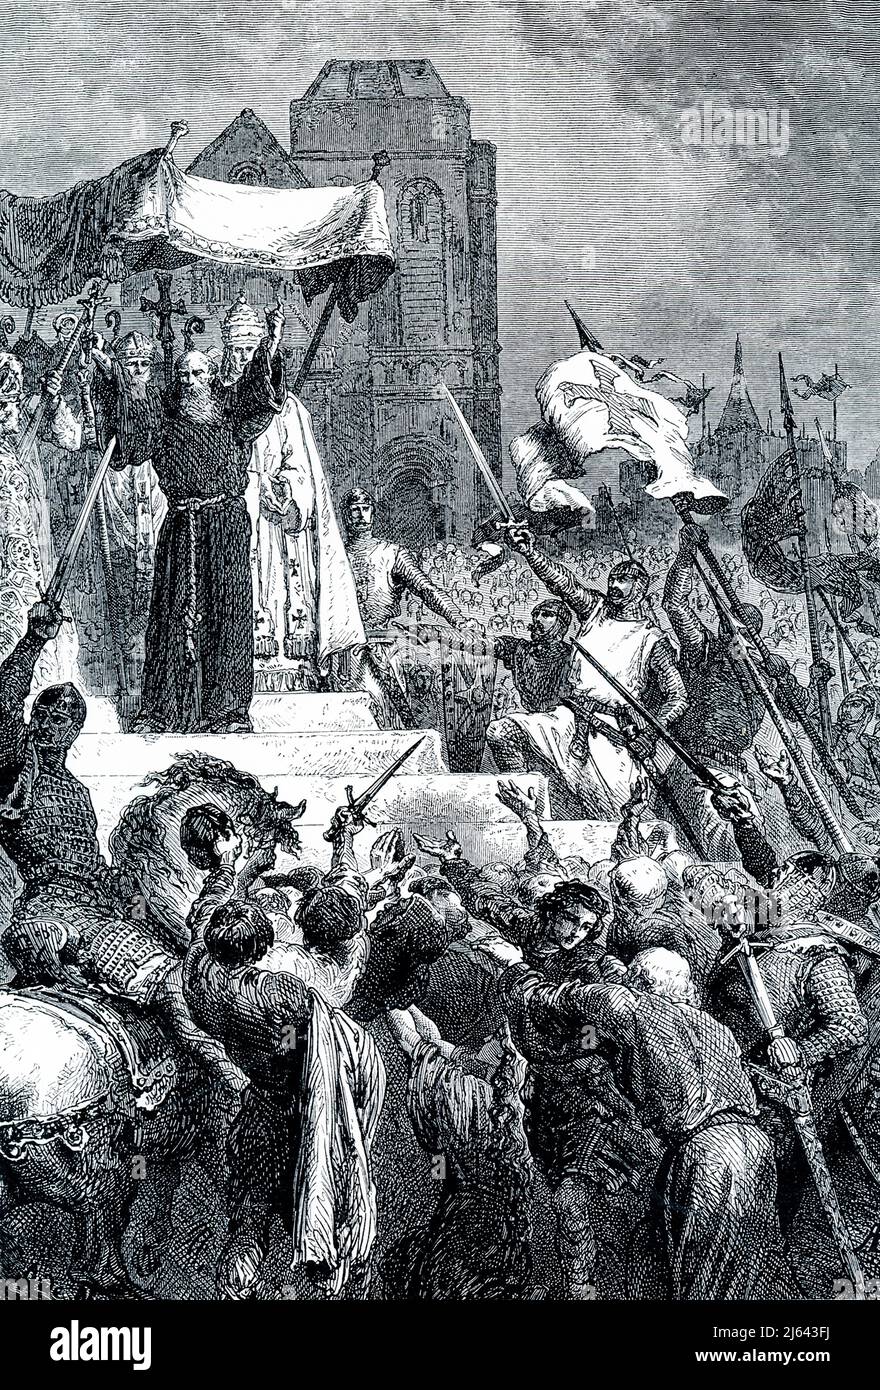 The 1906 caption reads: “PETER THE HERMIT PREACHING THE FIRST CRUSADE.—The crusades were started by Peter the Hermit, a holy man who returned from Jerusalem and spoke at a great Church Council held at Clermont in France, 1095. He told of the sufferings of Christians in the Holy Land and urged the warriors to win back the Sepulchre of Christ from the Mahometans. 'God wills it!' cried the Pope, and the whole multitude was seized with religious enthusiasm, and enrolled themselves under the banner of the cross.”  Peter the Hermit (c. 1050—1115), ascetic and monastic founder, considered one of the Stock Photo